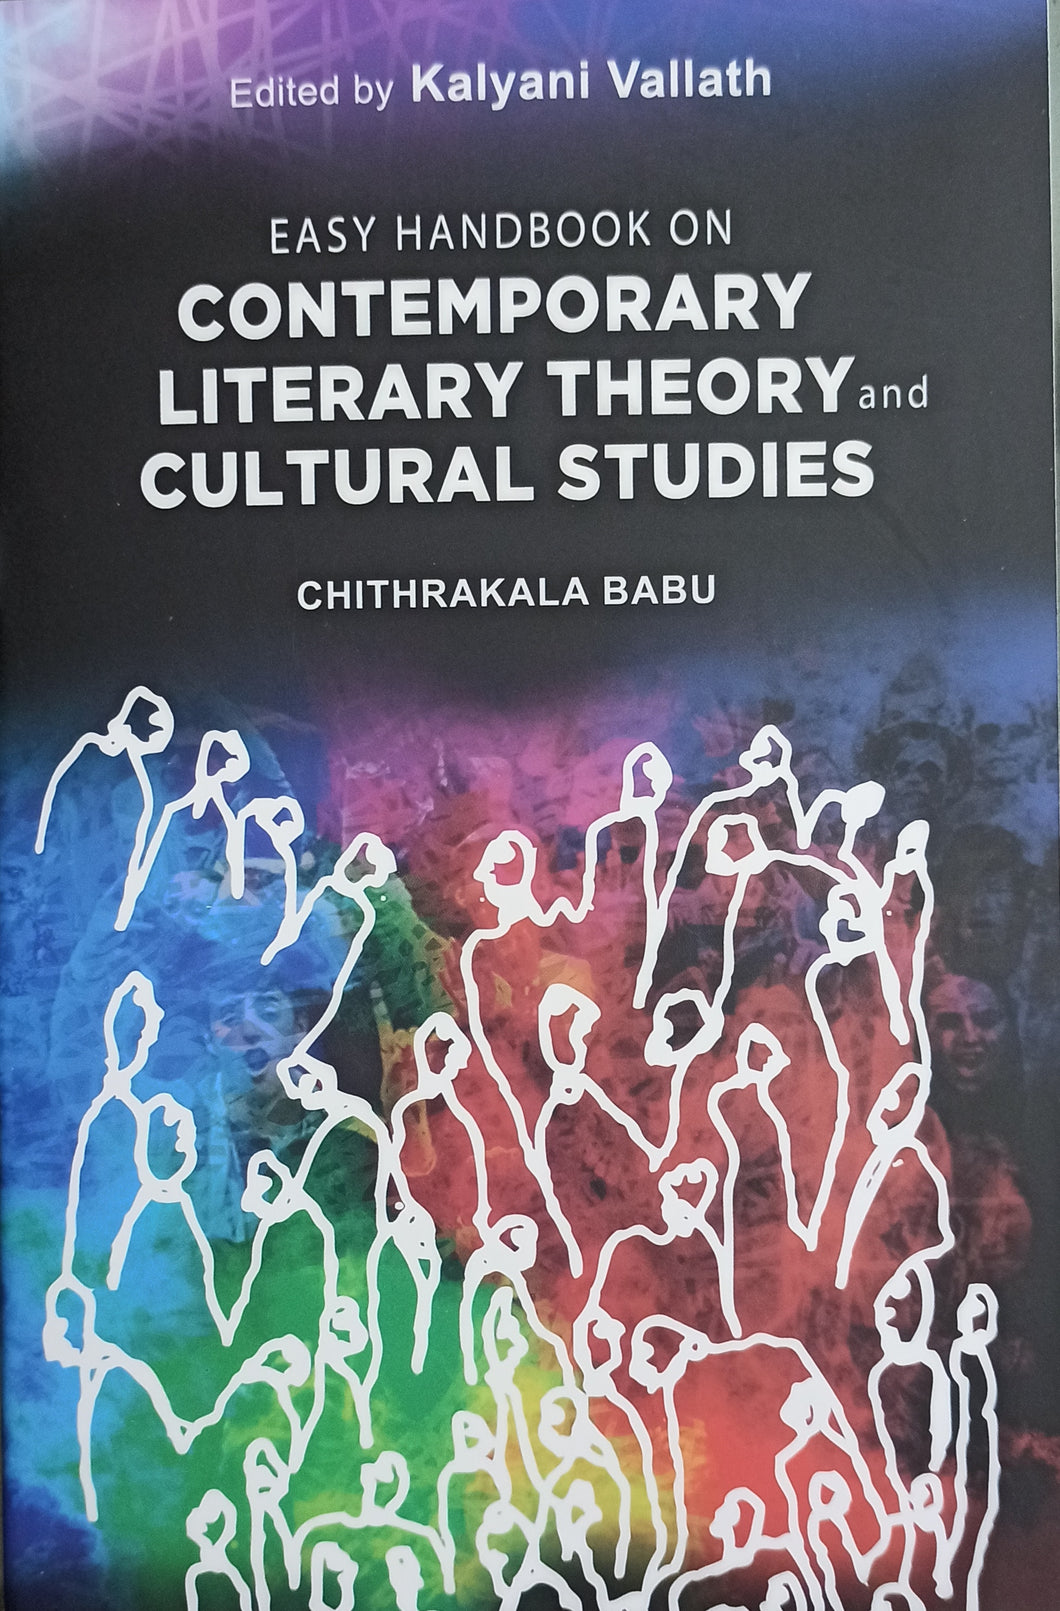 EASY HANDBOOK ON CONTEMPORARY LITERARY THEORY AND CULTURAL STUDIES